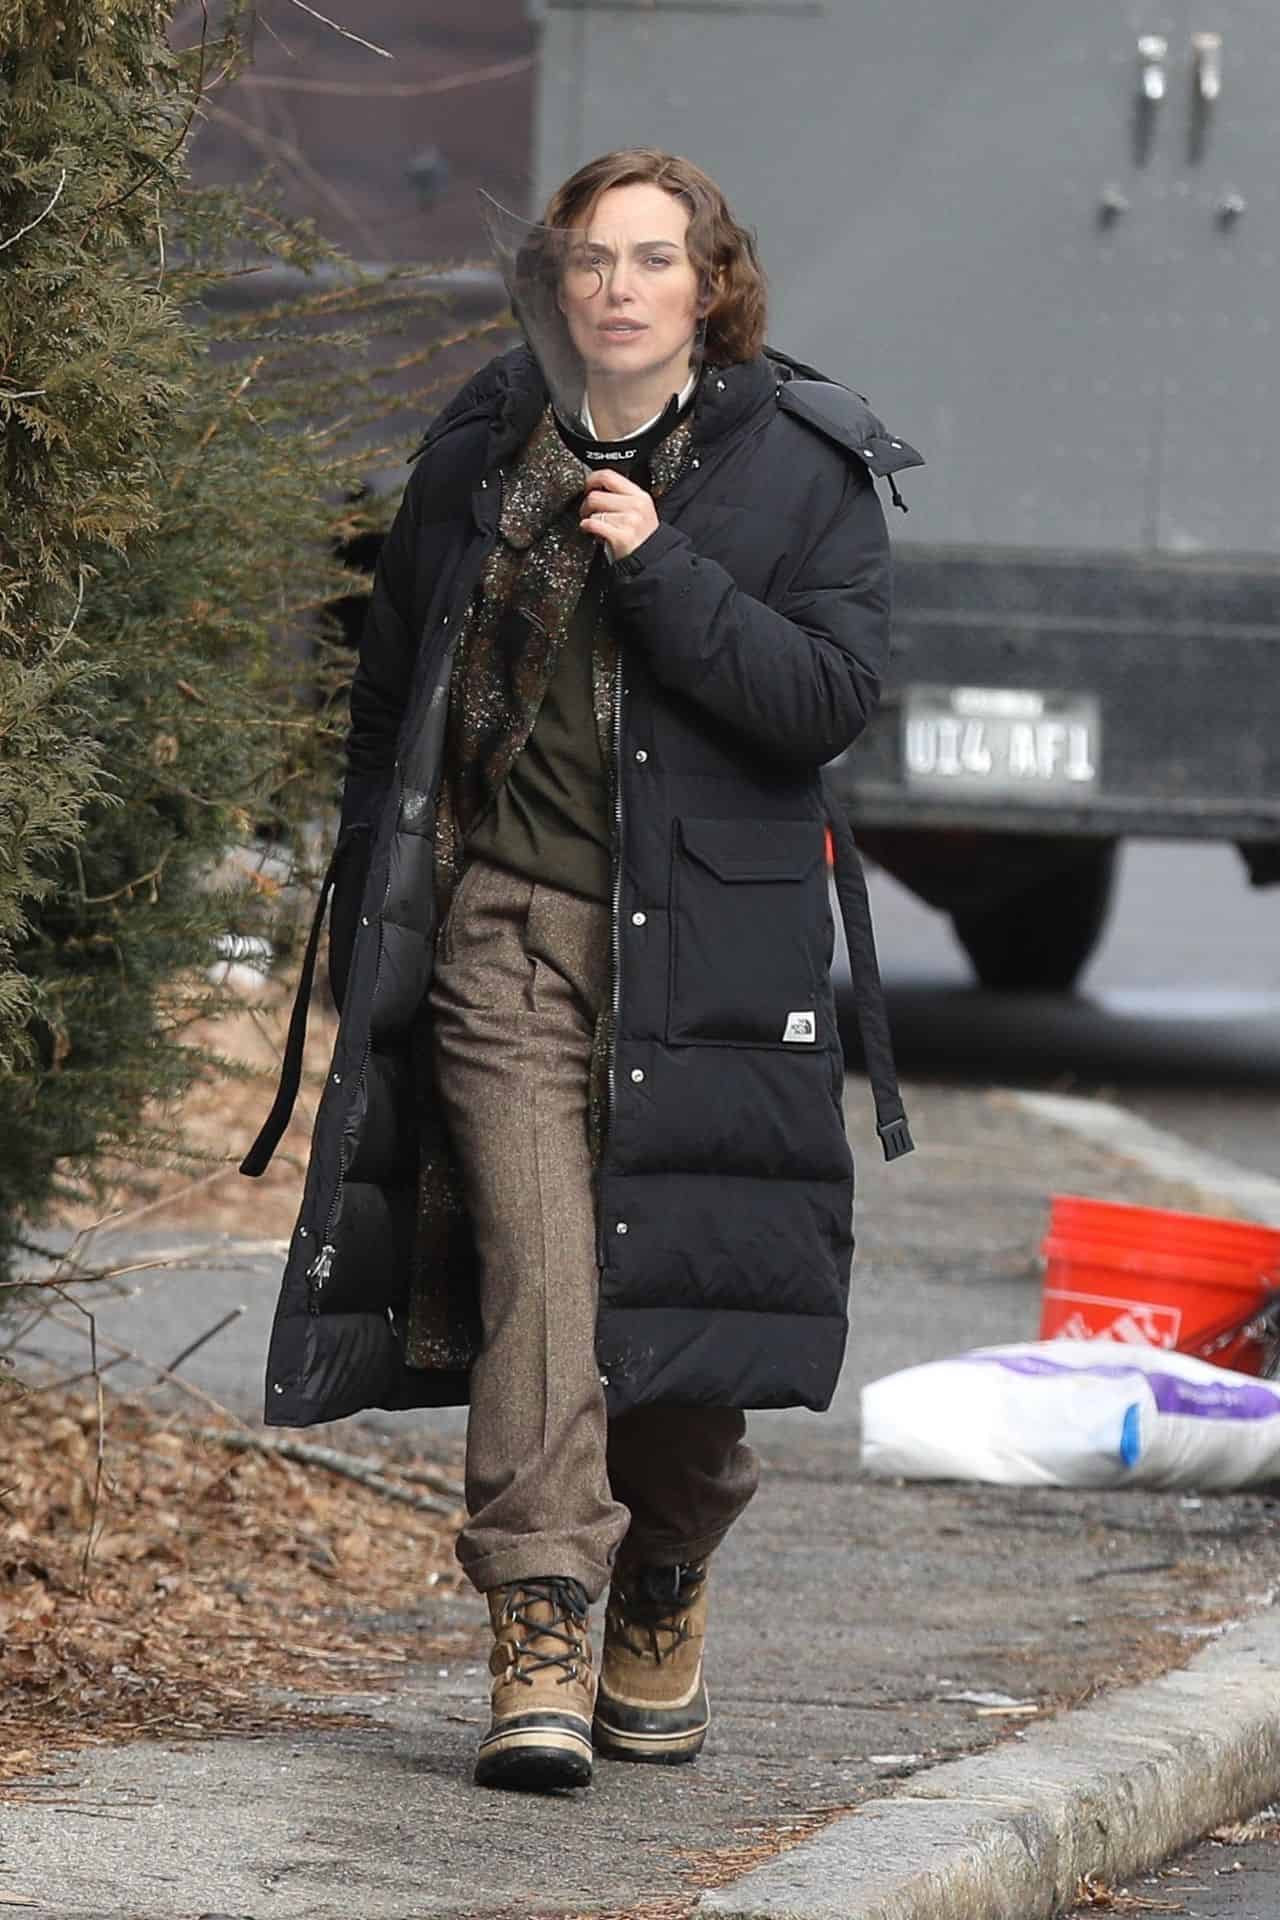 Keira Knightley Out from the Set During the Break of Boston Strangler